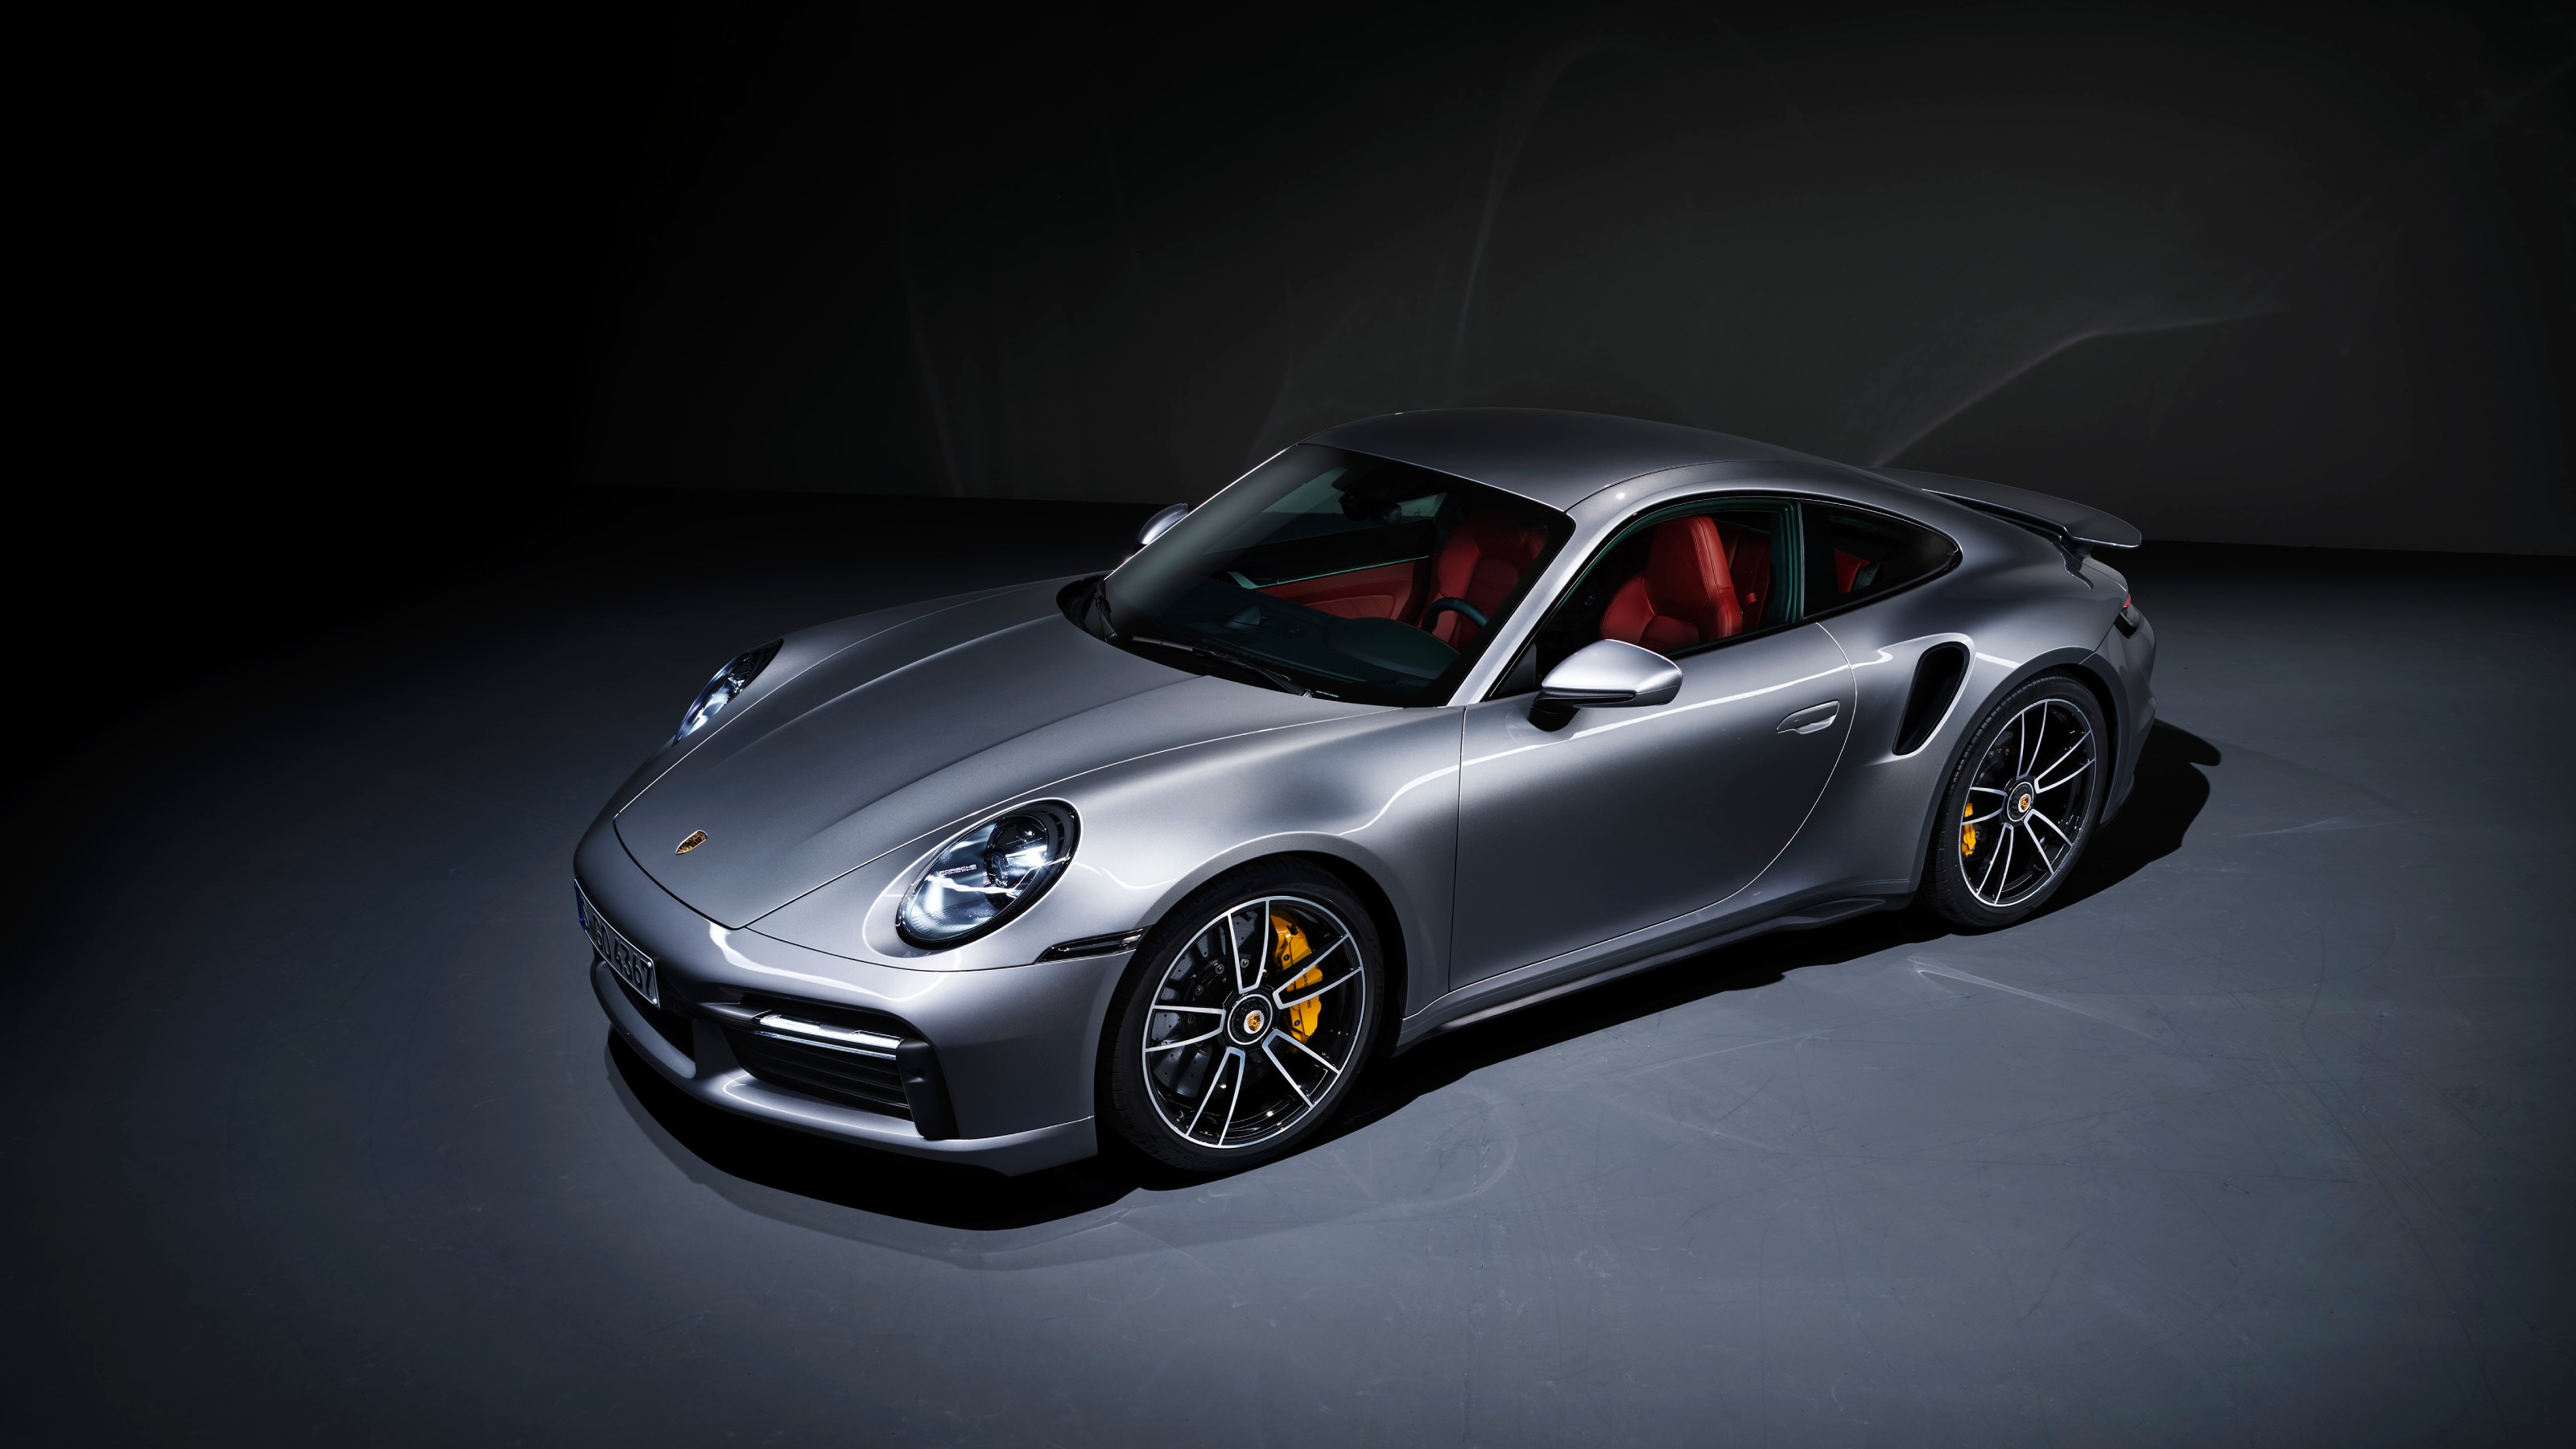 A Porsche 911 Carrera GTS to celebrate the 24 Hours of Le Mans Centenary